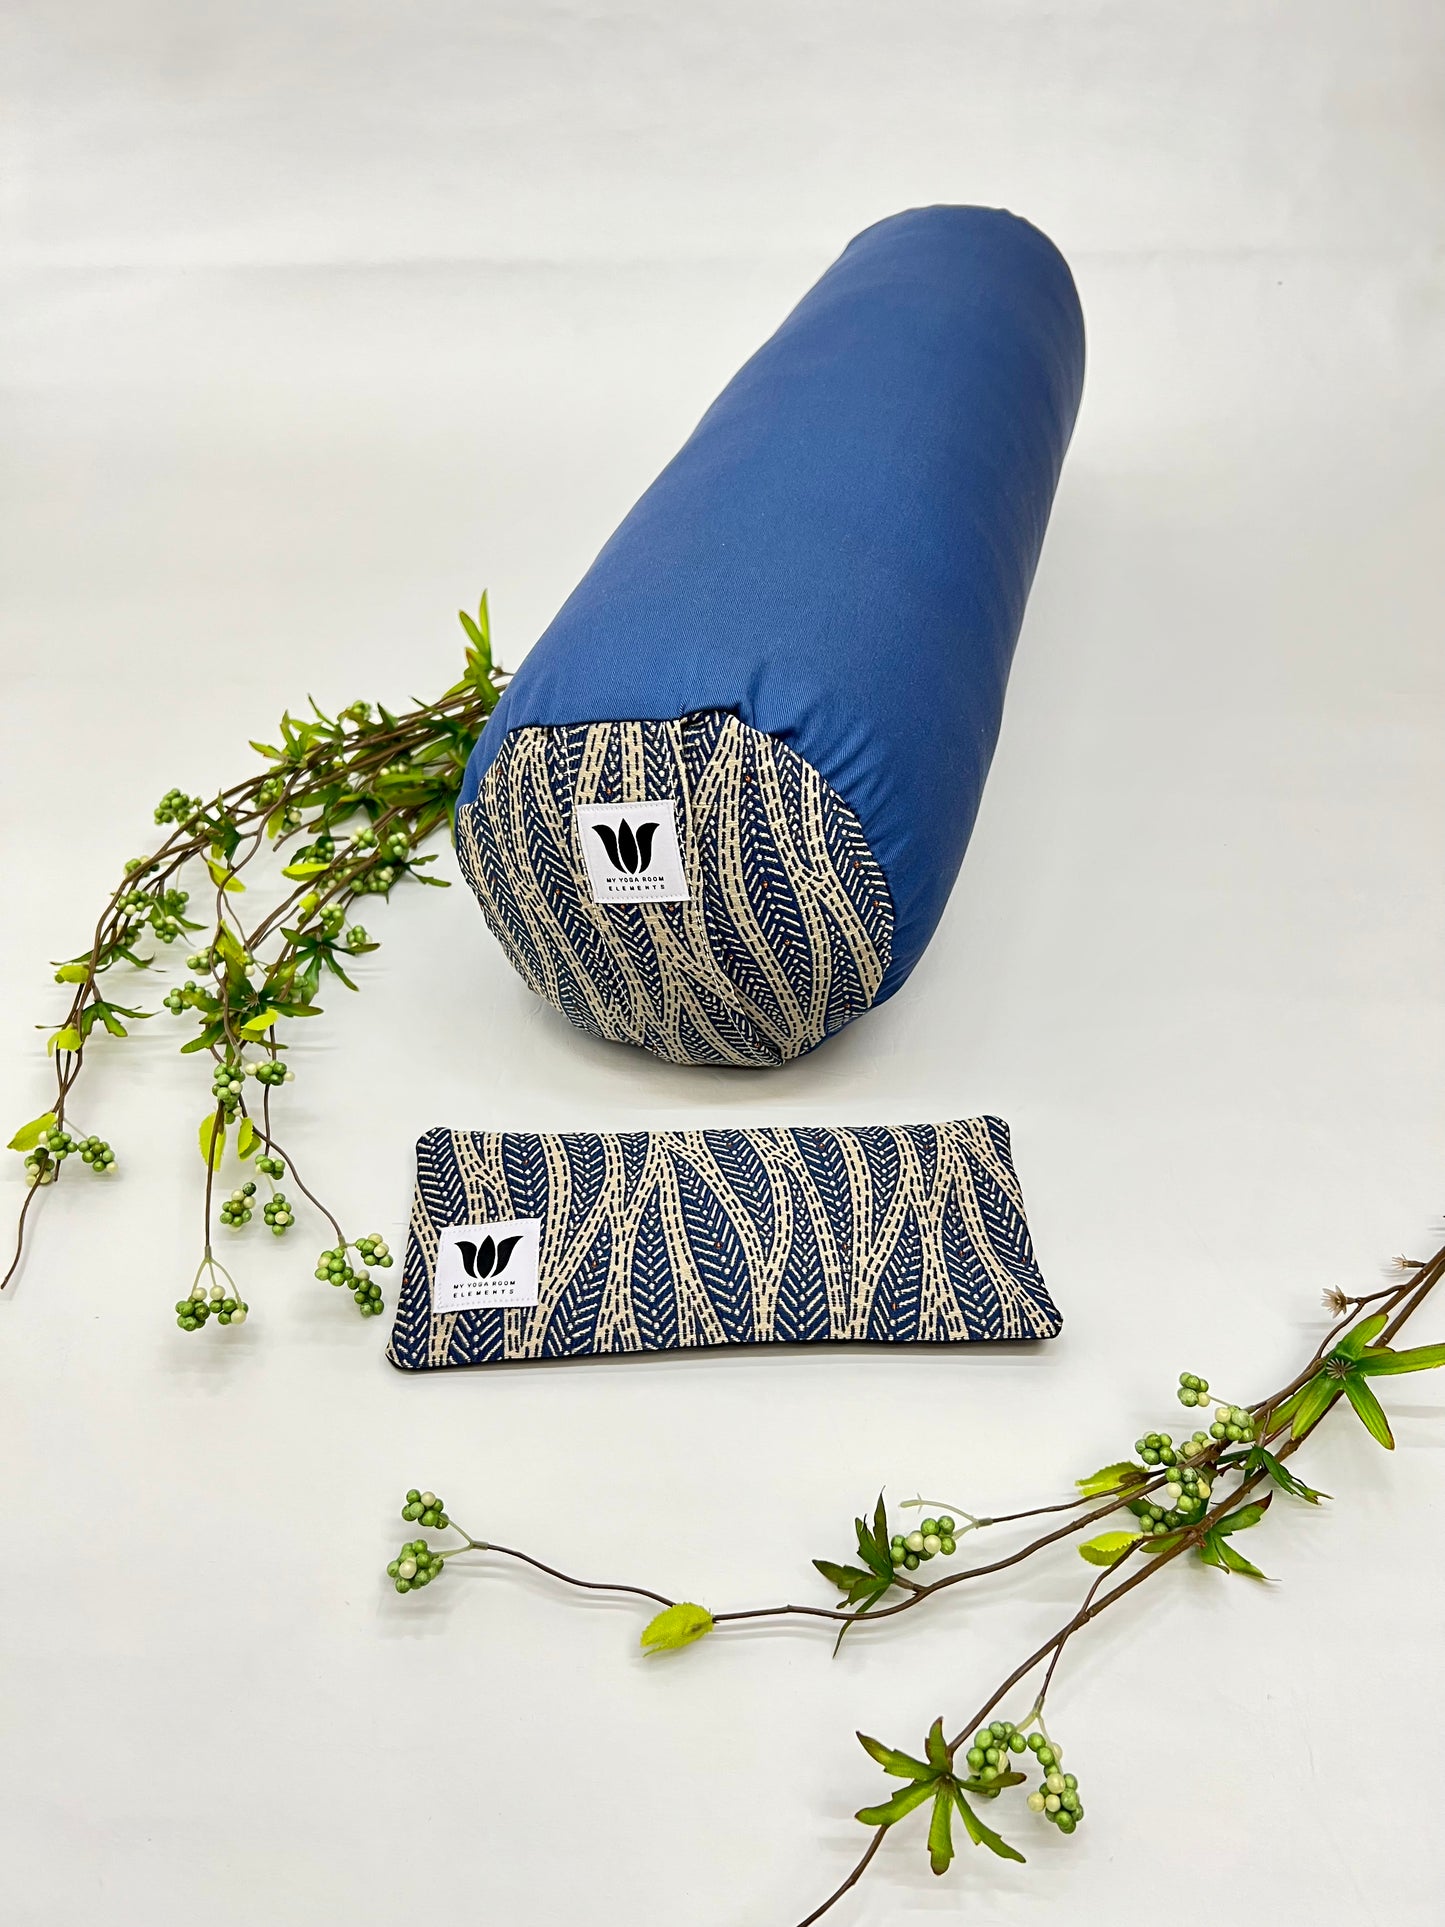 Round Yoga Bolster with matching eye pillow  Blue in Color, Handcrafted in Canada